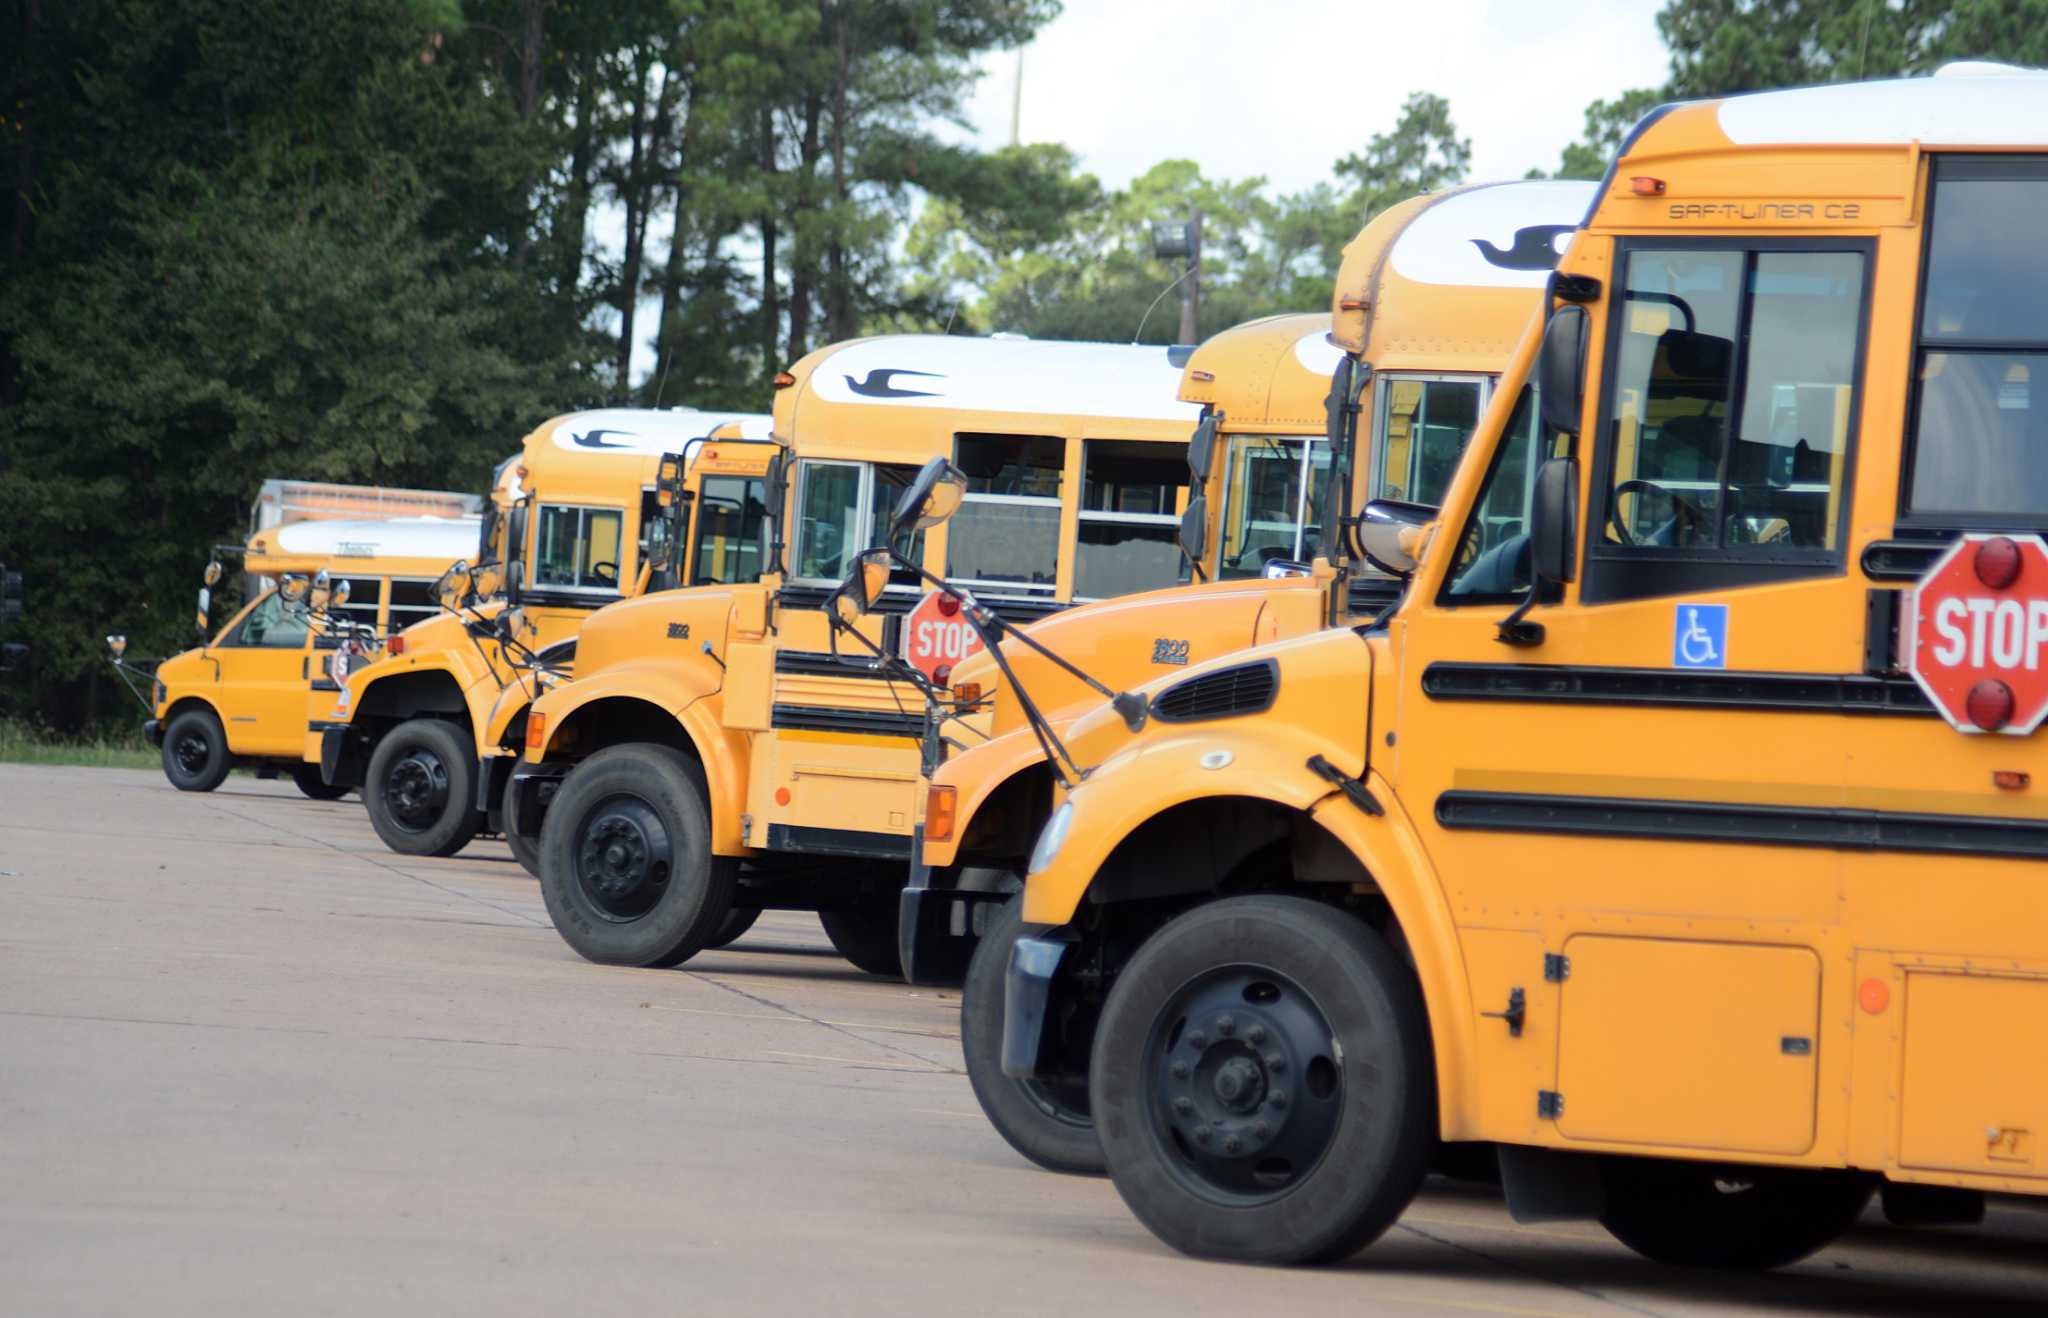 montgomery township nj school district busing policy